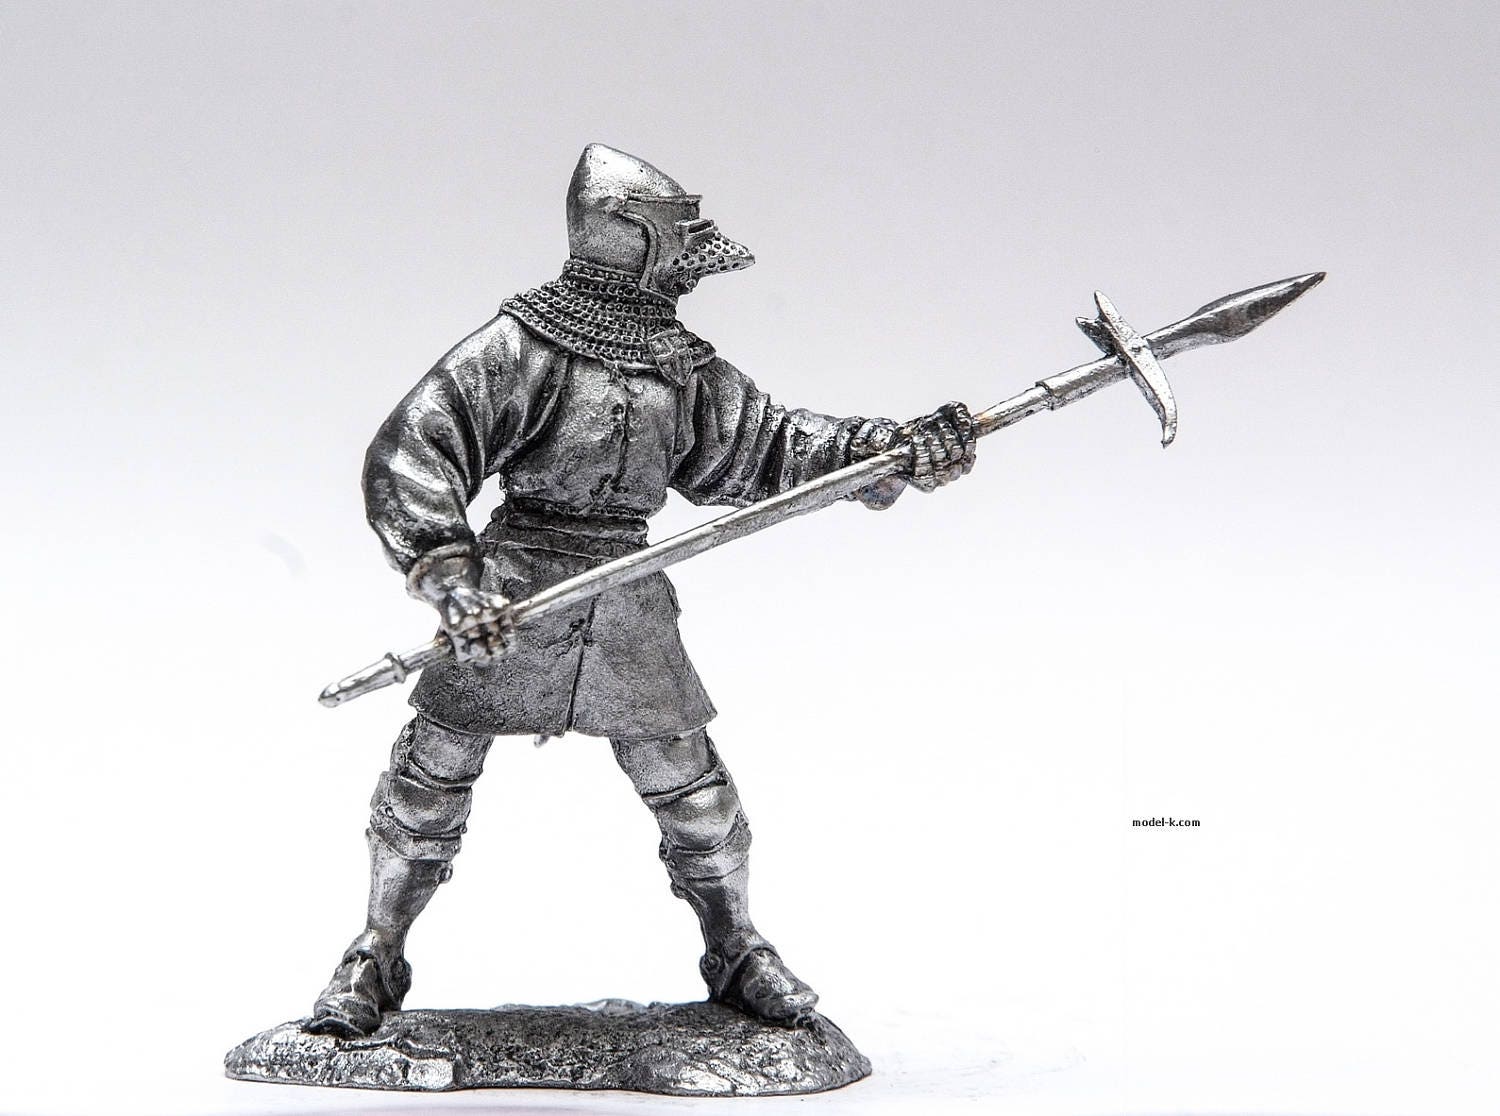 54 mm Details about   Tin Soldiers Trumpeter of Teutonic Order Middle Ages 13th century 